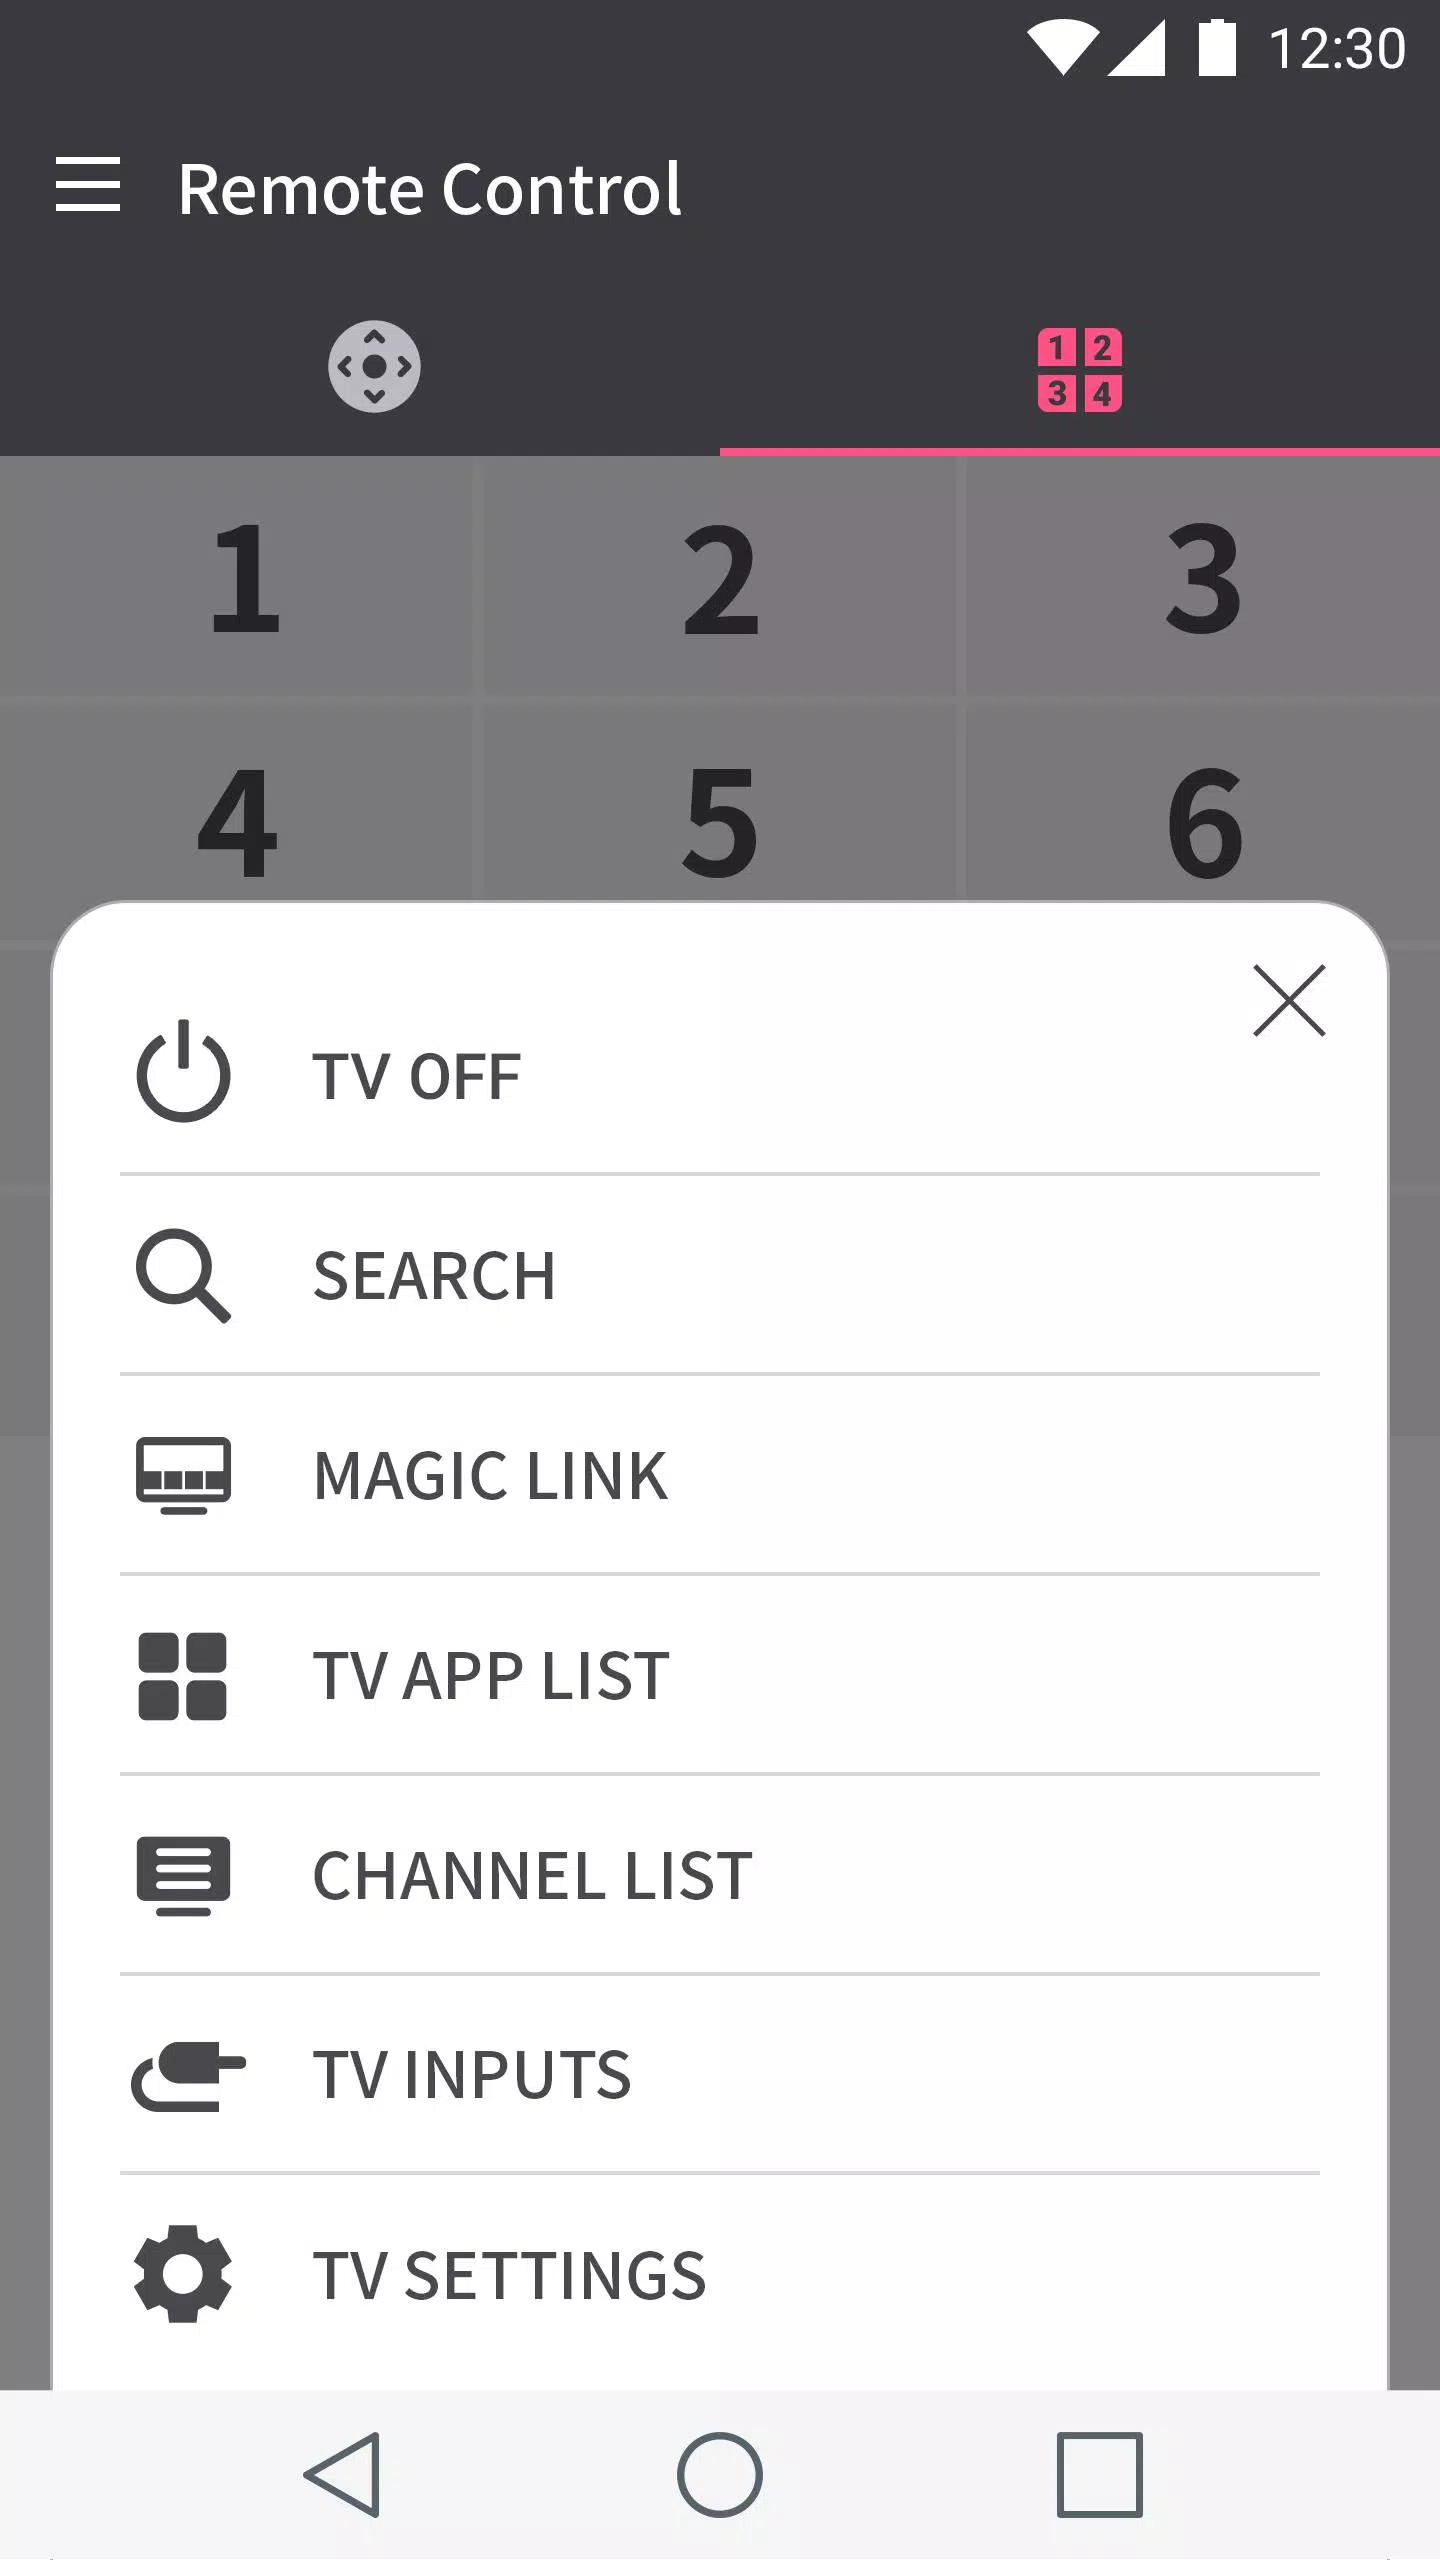 LG TV Plus APK for Android Download